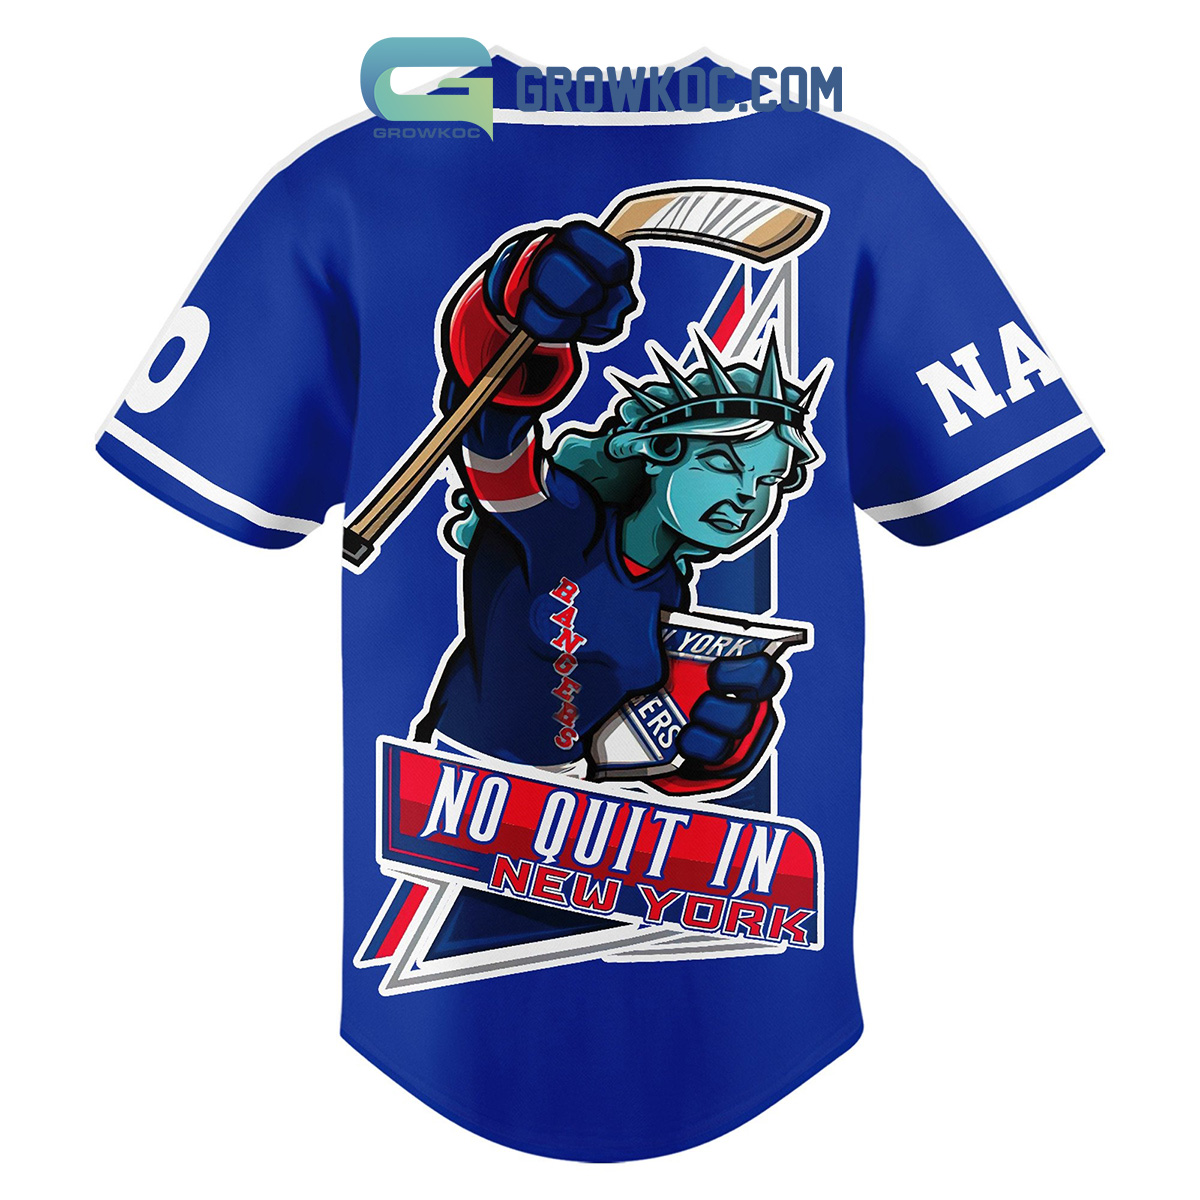 Personalized New York Rangers No Quit In New York Baseball Jersey